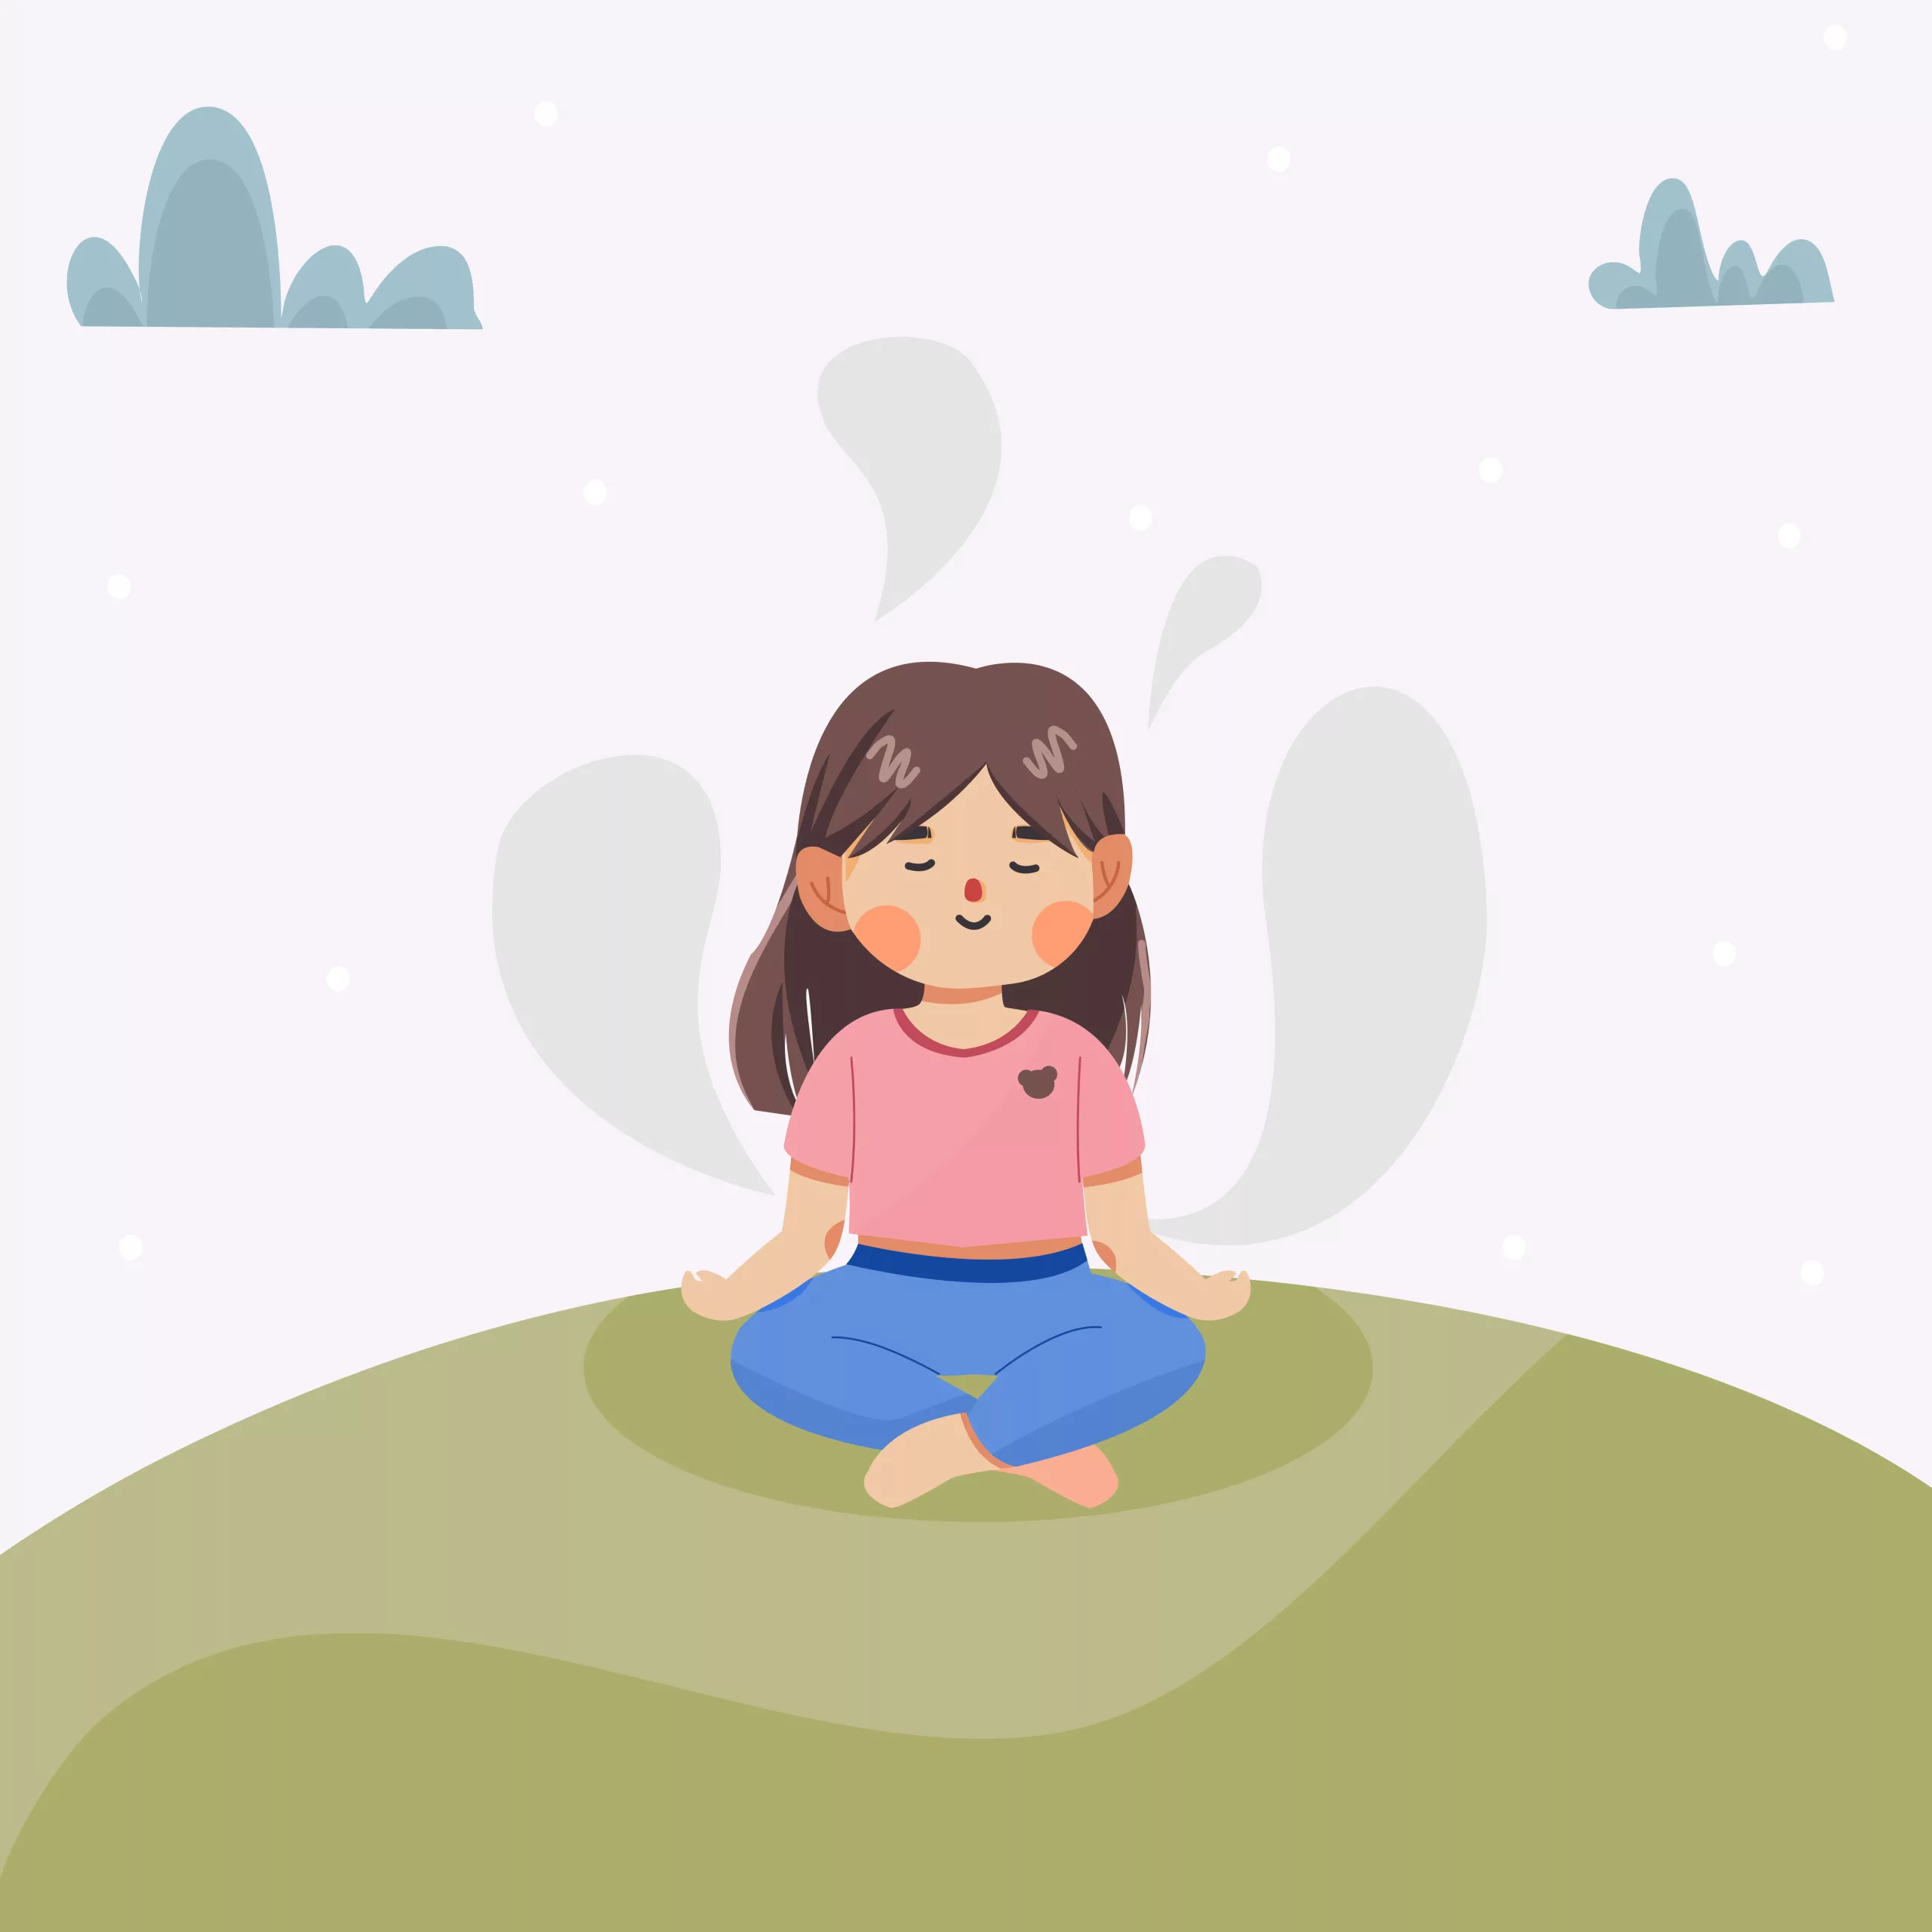 A girl meditating on the ground.